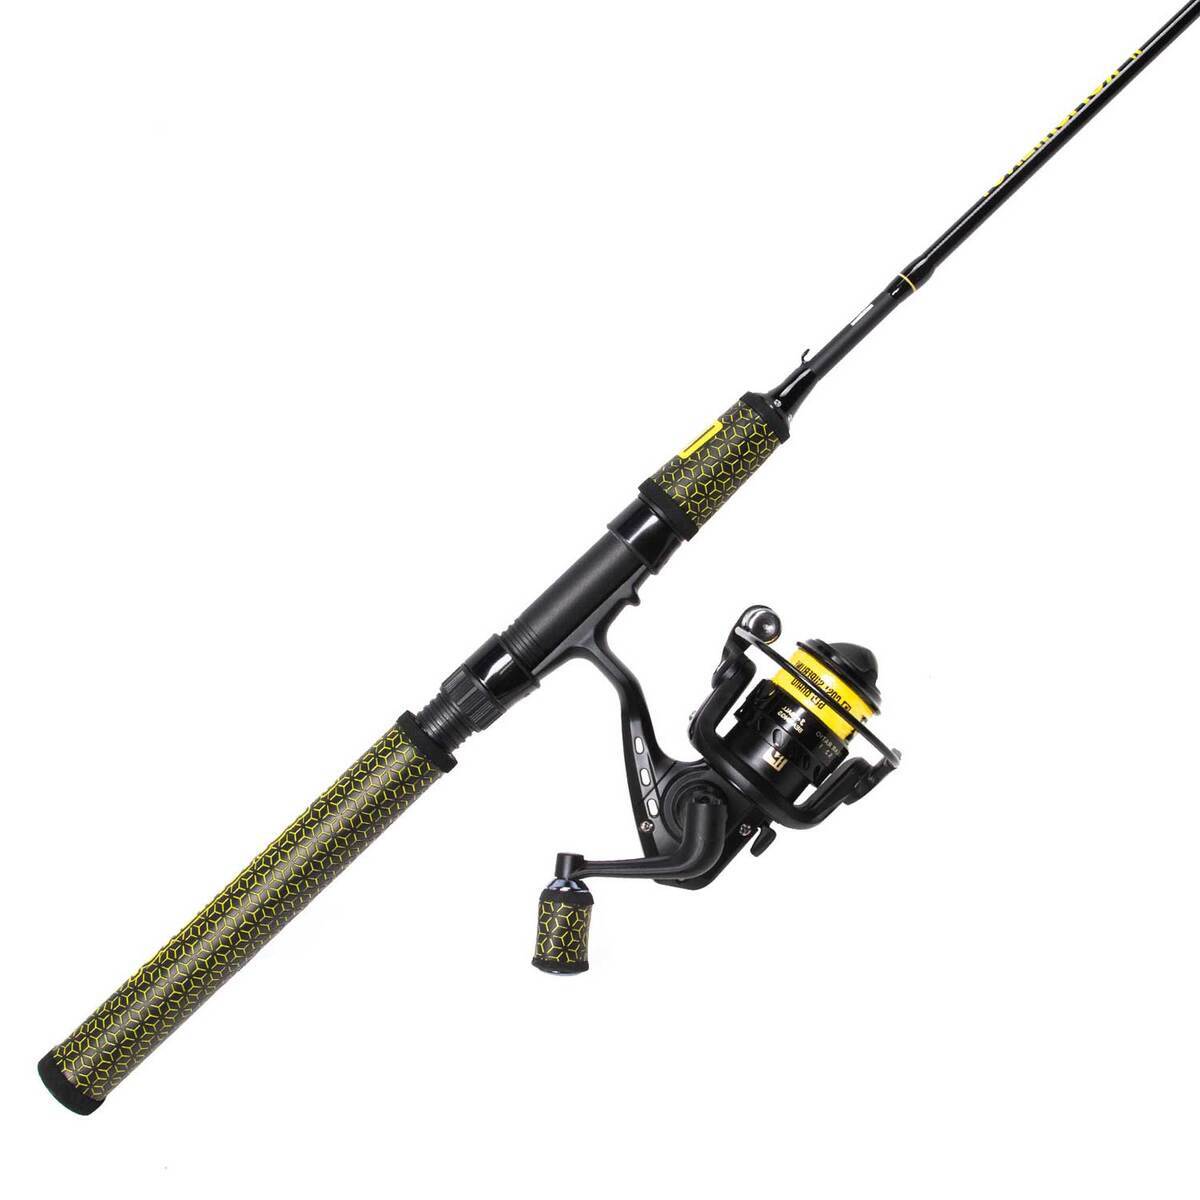 Profishiency Bumblebee Spinning Rod and Reel Combo - 5ft 6in, Medium Power,  2pc